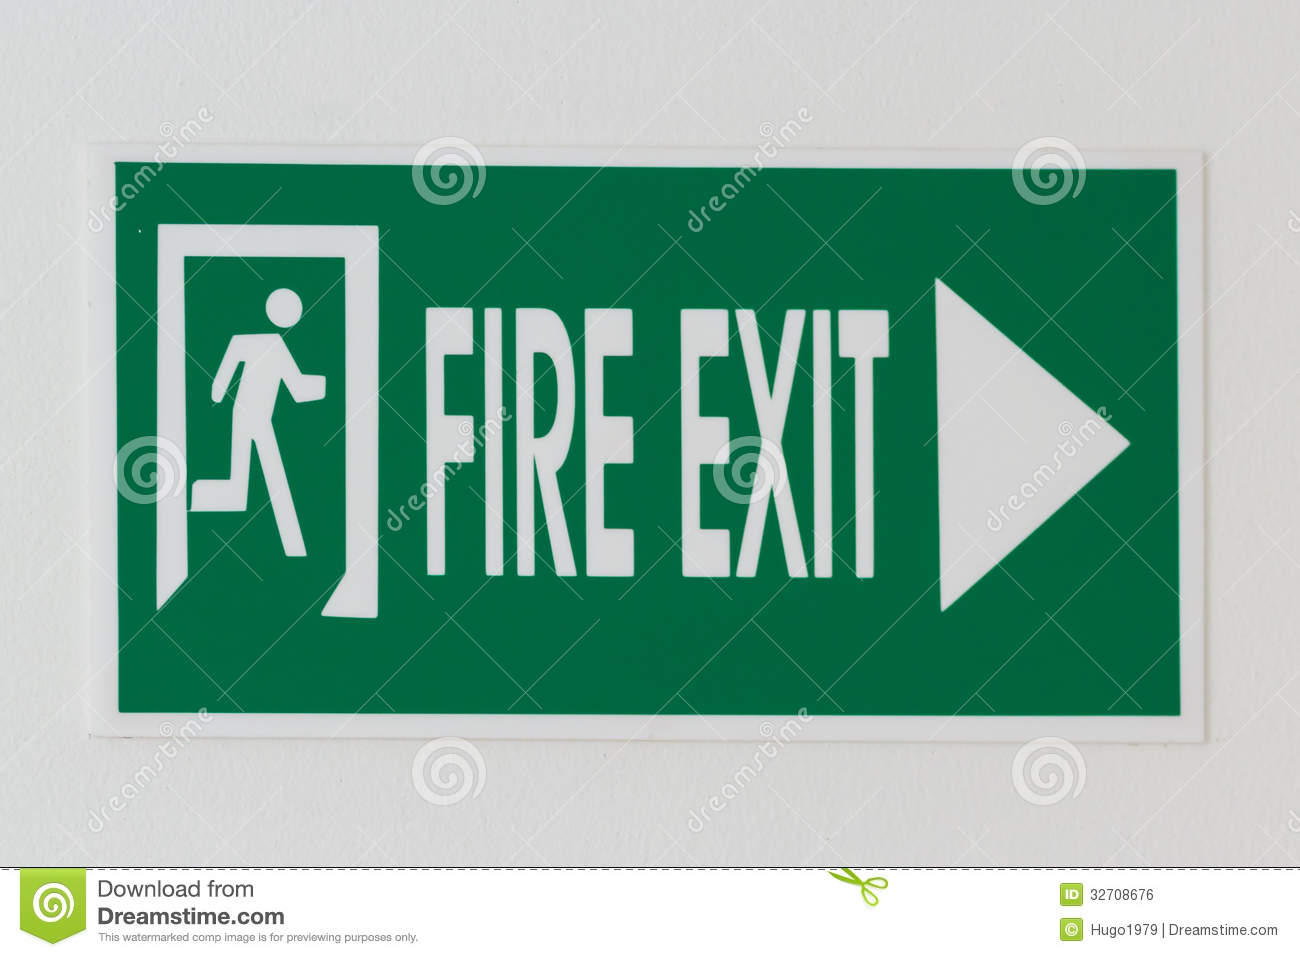 Direction Of Exit Signboard For Emergency Evacuation Purpose